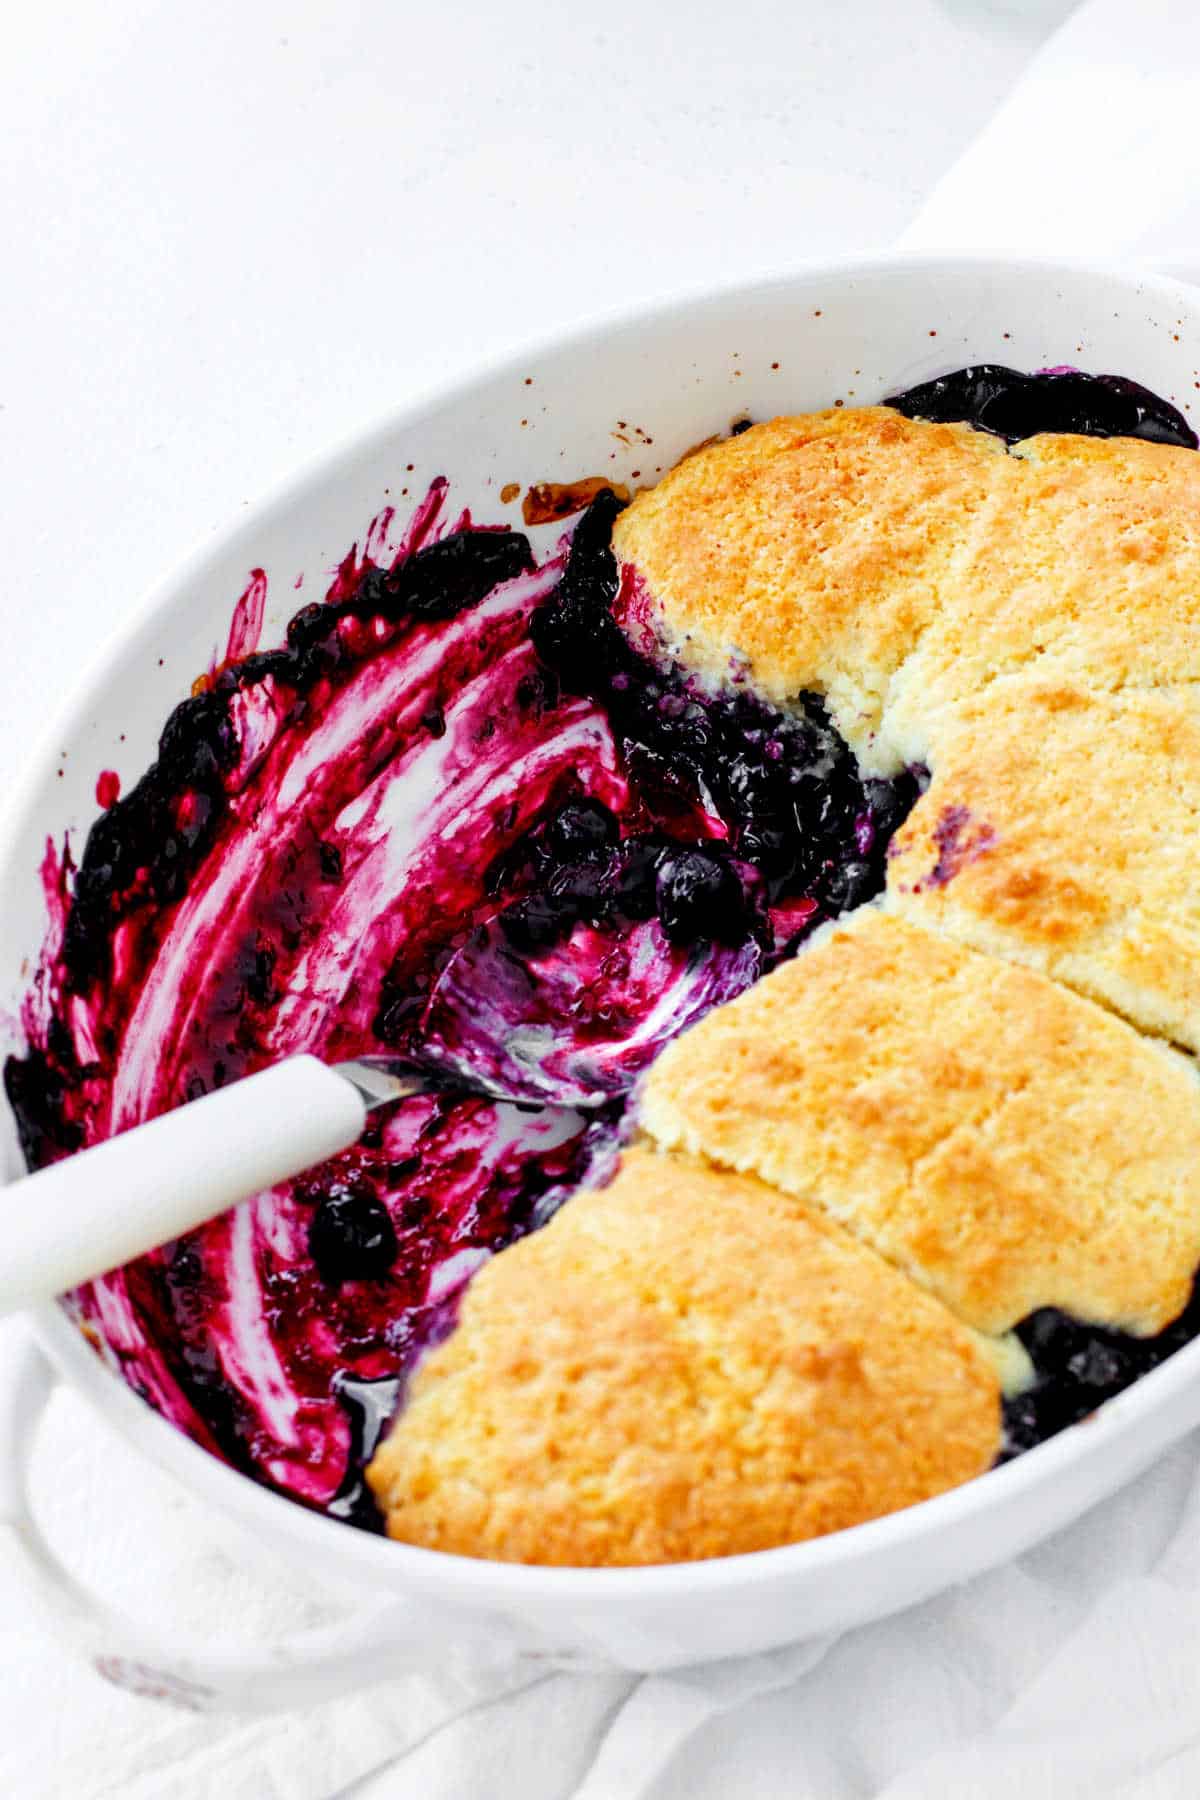 White dish with blueberry cobbler, spoon inside, white surface.